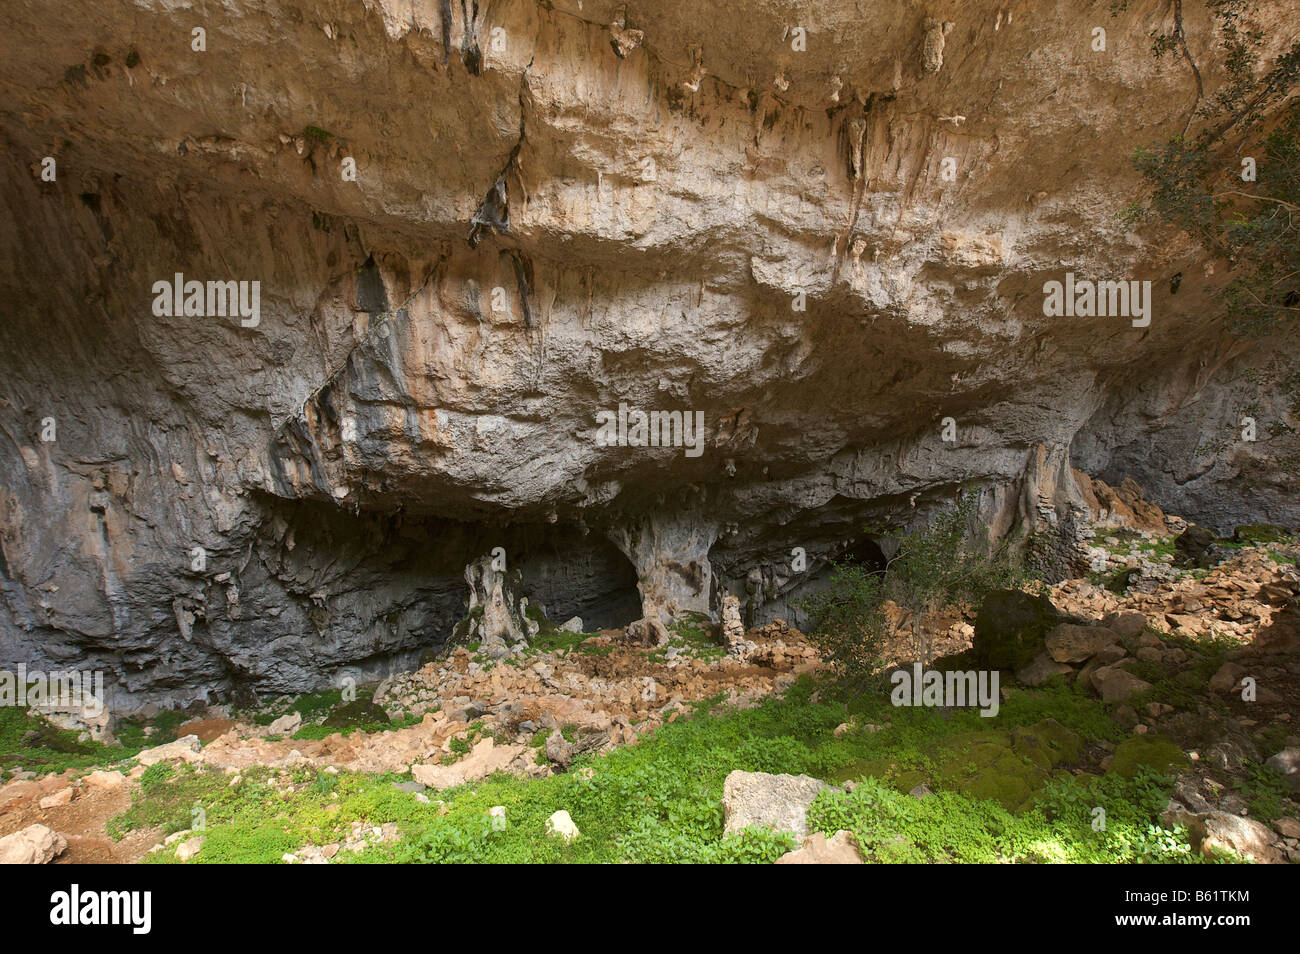 Nuraghic Village in a collapsed sinkhole on Monte Tiscali in the Gennargentu National Park between Dorgali and Oliena, Sardinia Stock Photo